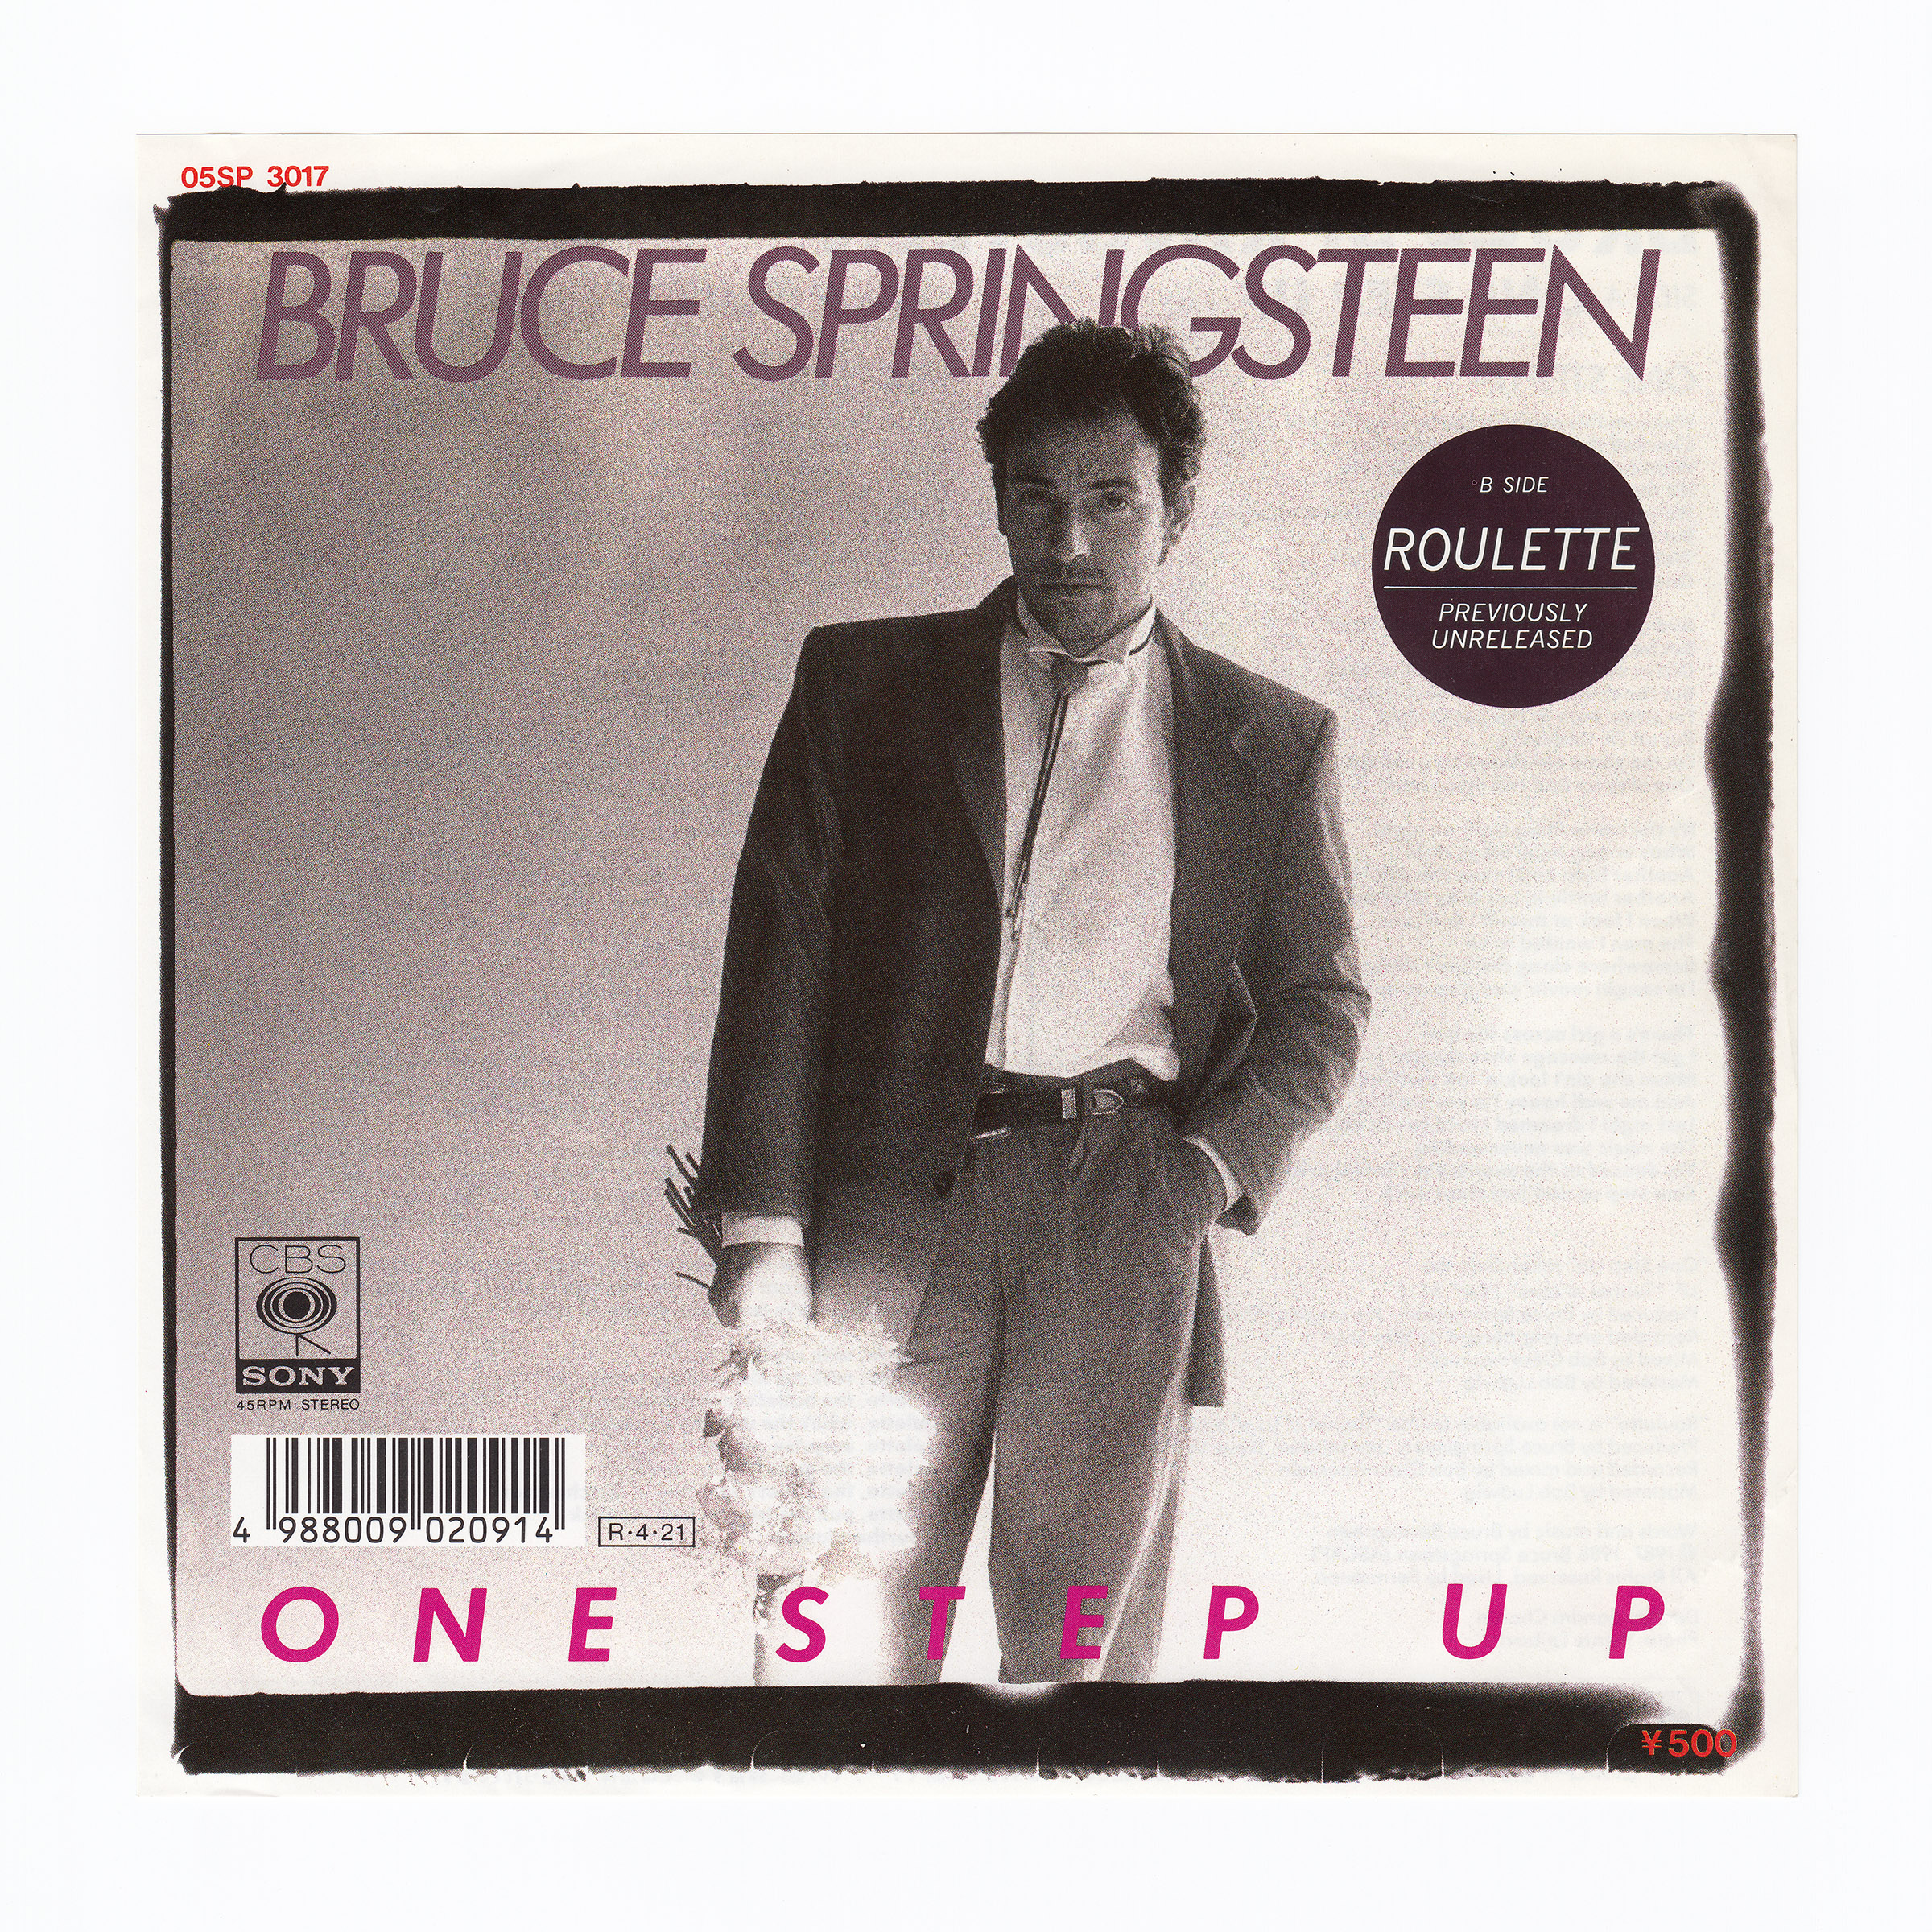 Bruce Springsteen Collection One Step Up